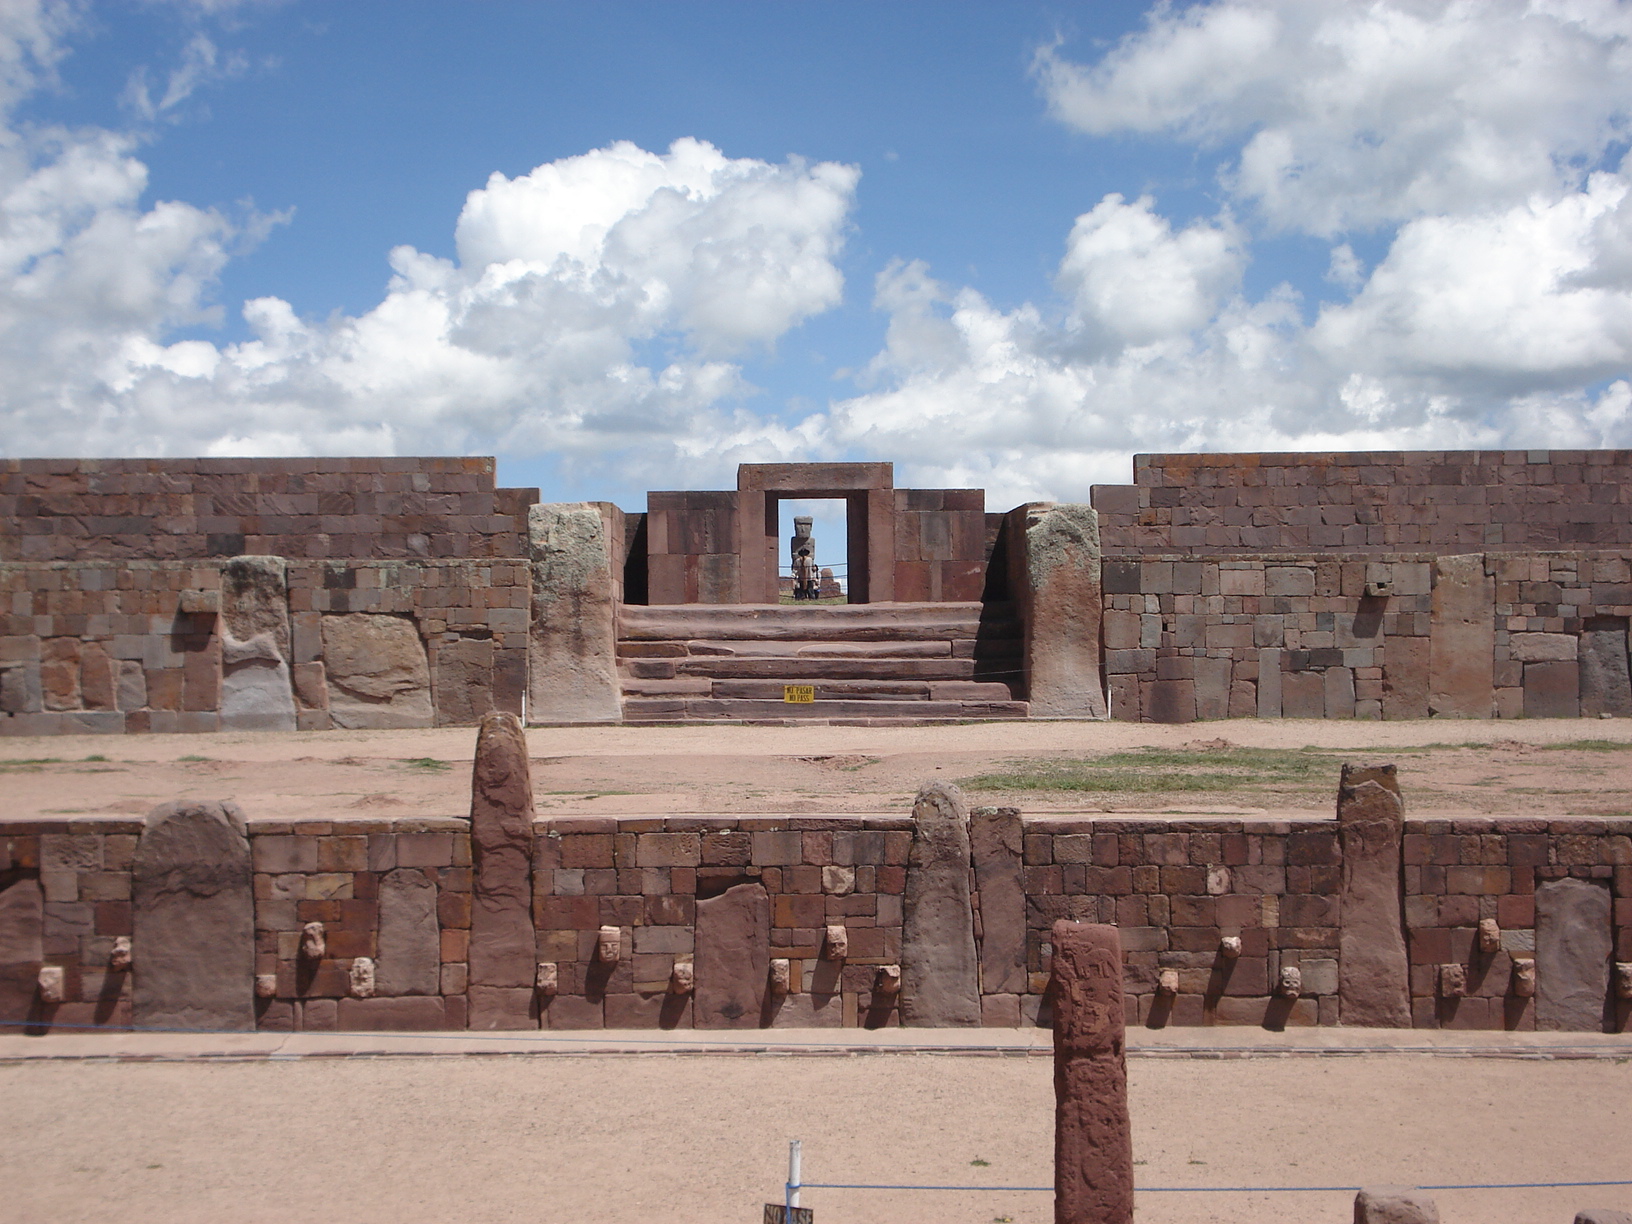 Incan Technology and Science